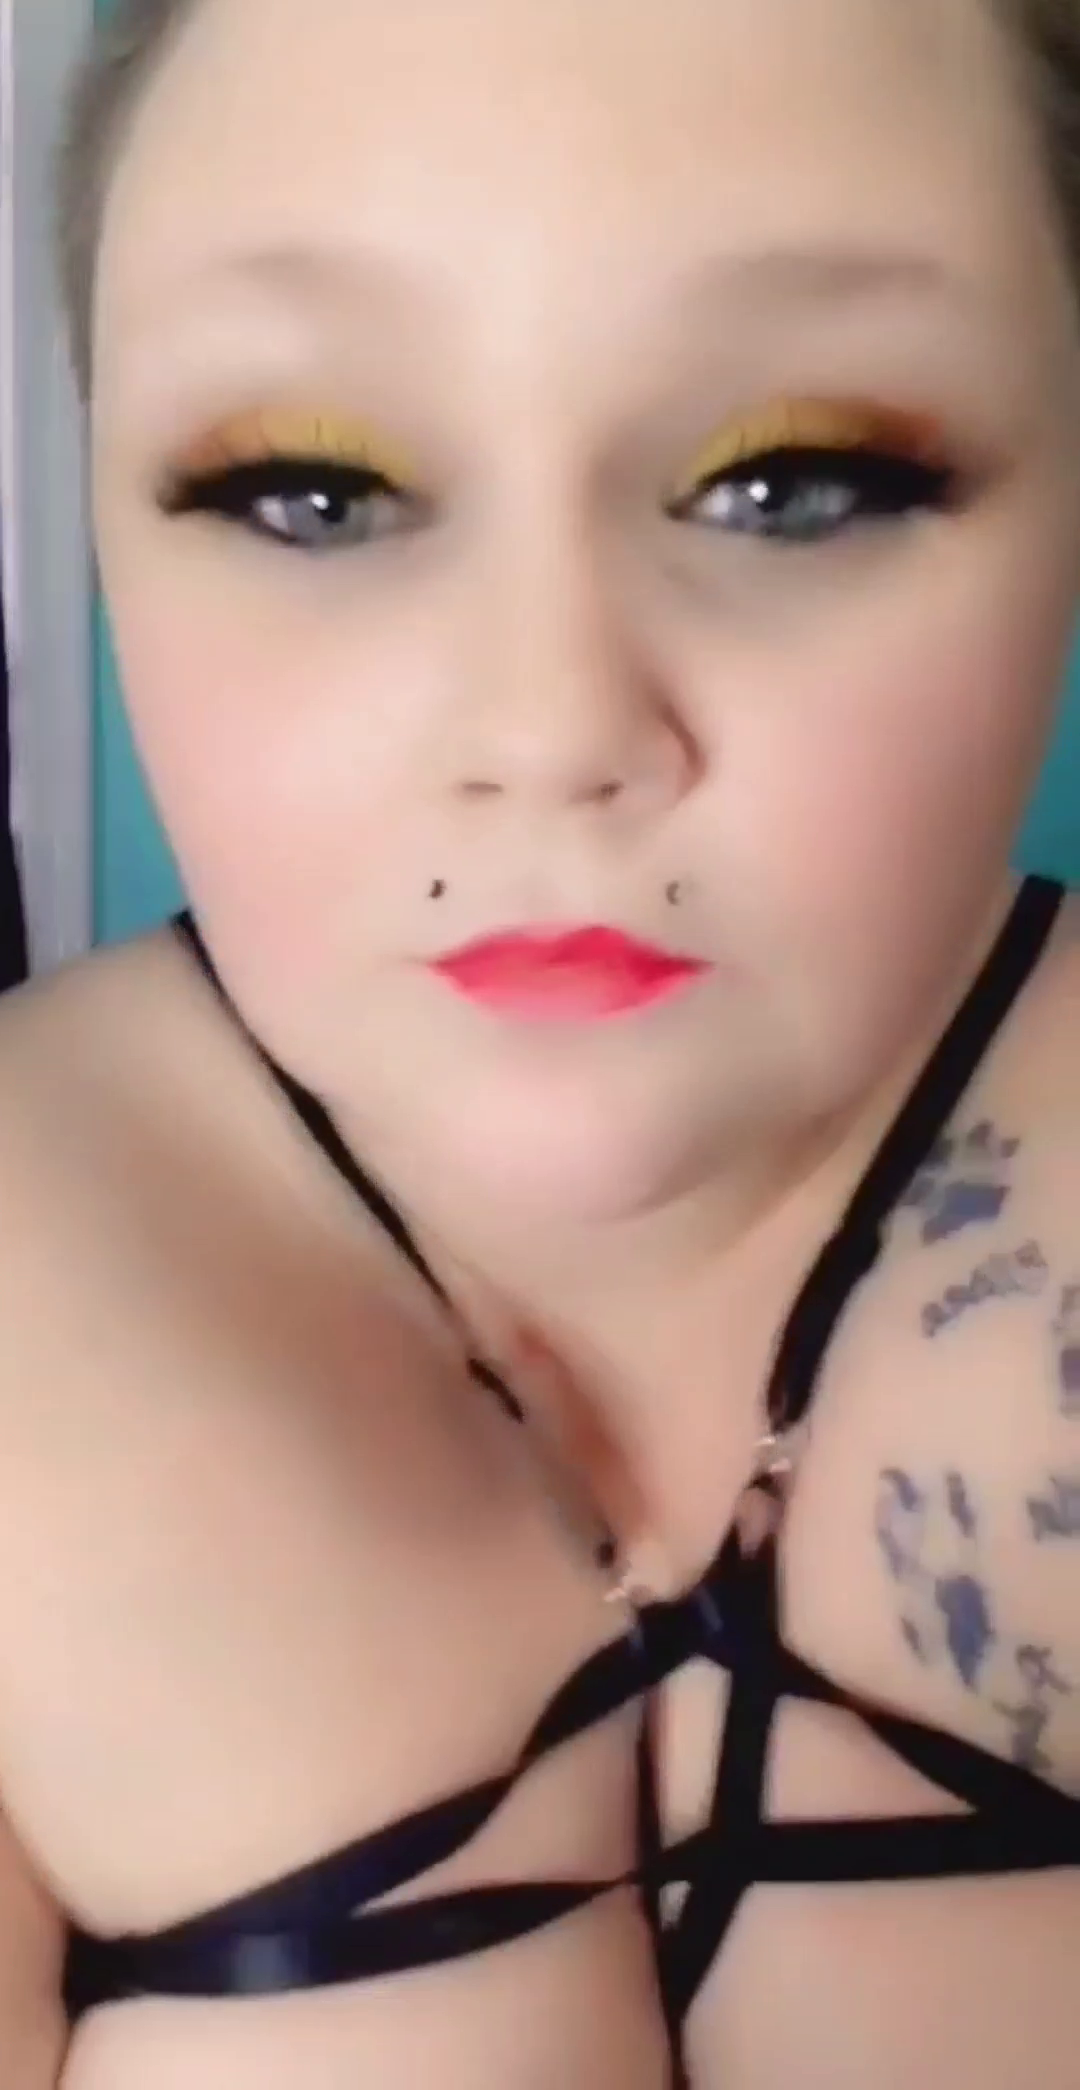 Watch the Video by Vixey Maeve with the username @vixeymaeve, who is a star user, posted on April 7, 2020 and the text says 'Getting your face fucked is 10 times hotter when your lipstick gets smudged 🤤
View the video that goes wirh this clip at my website!'